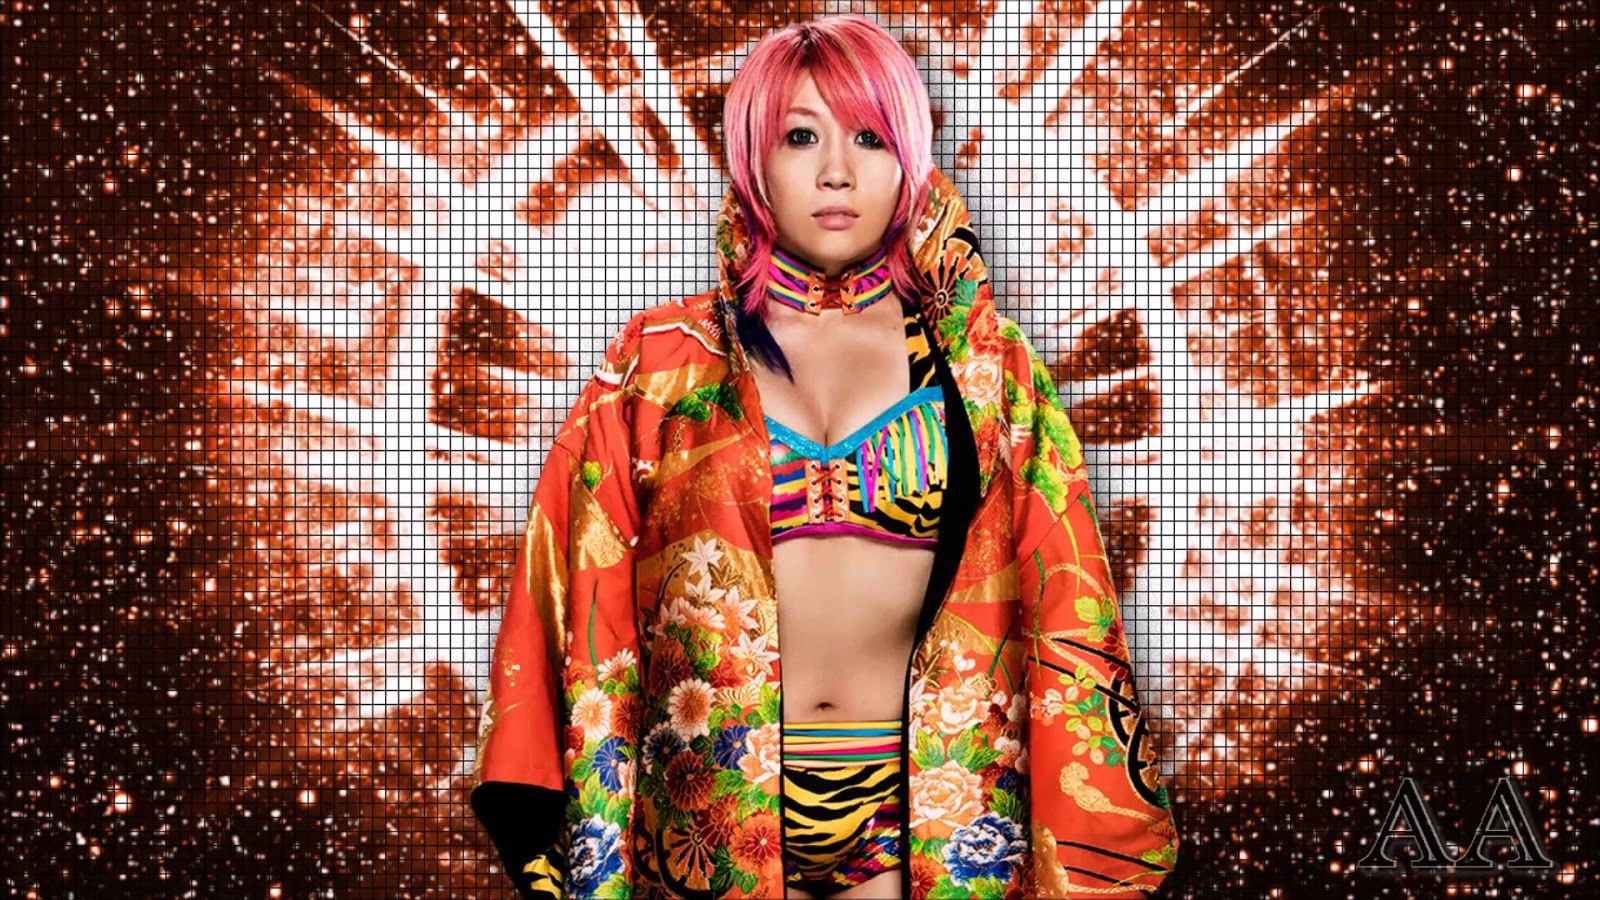 Superstar Stock Market: Undefeated Asuka Ready for Main Roster?. Smark Out Moment